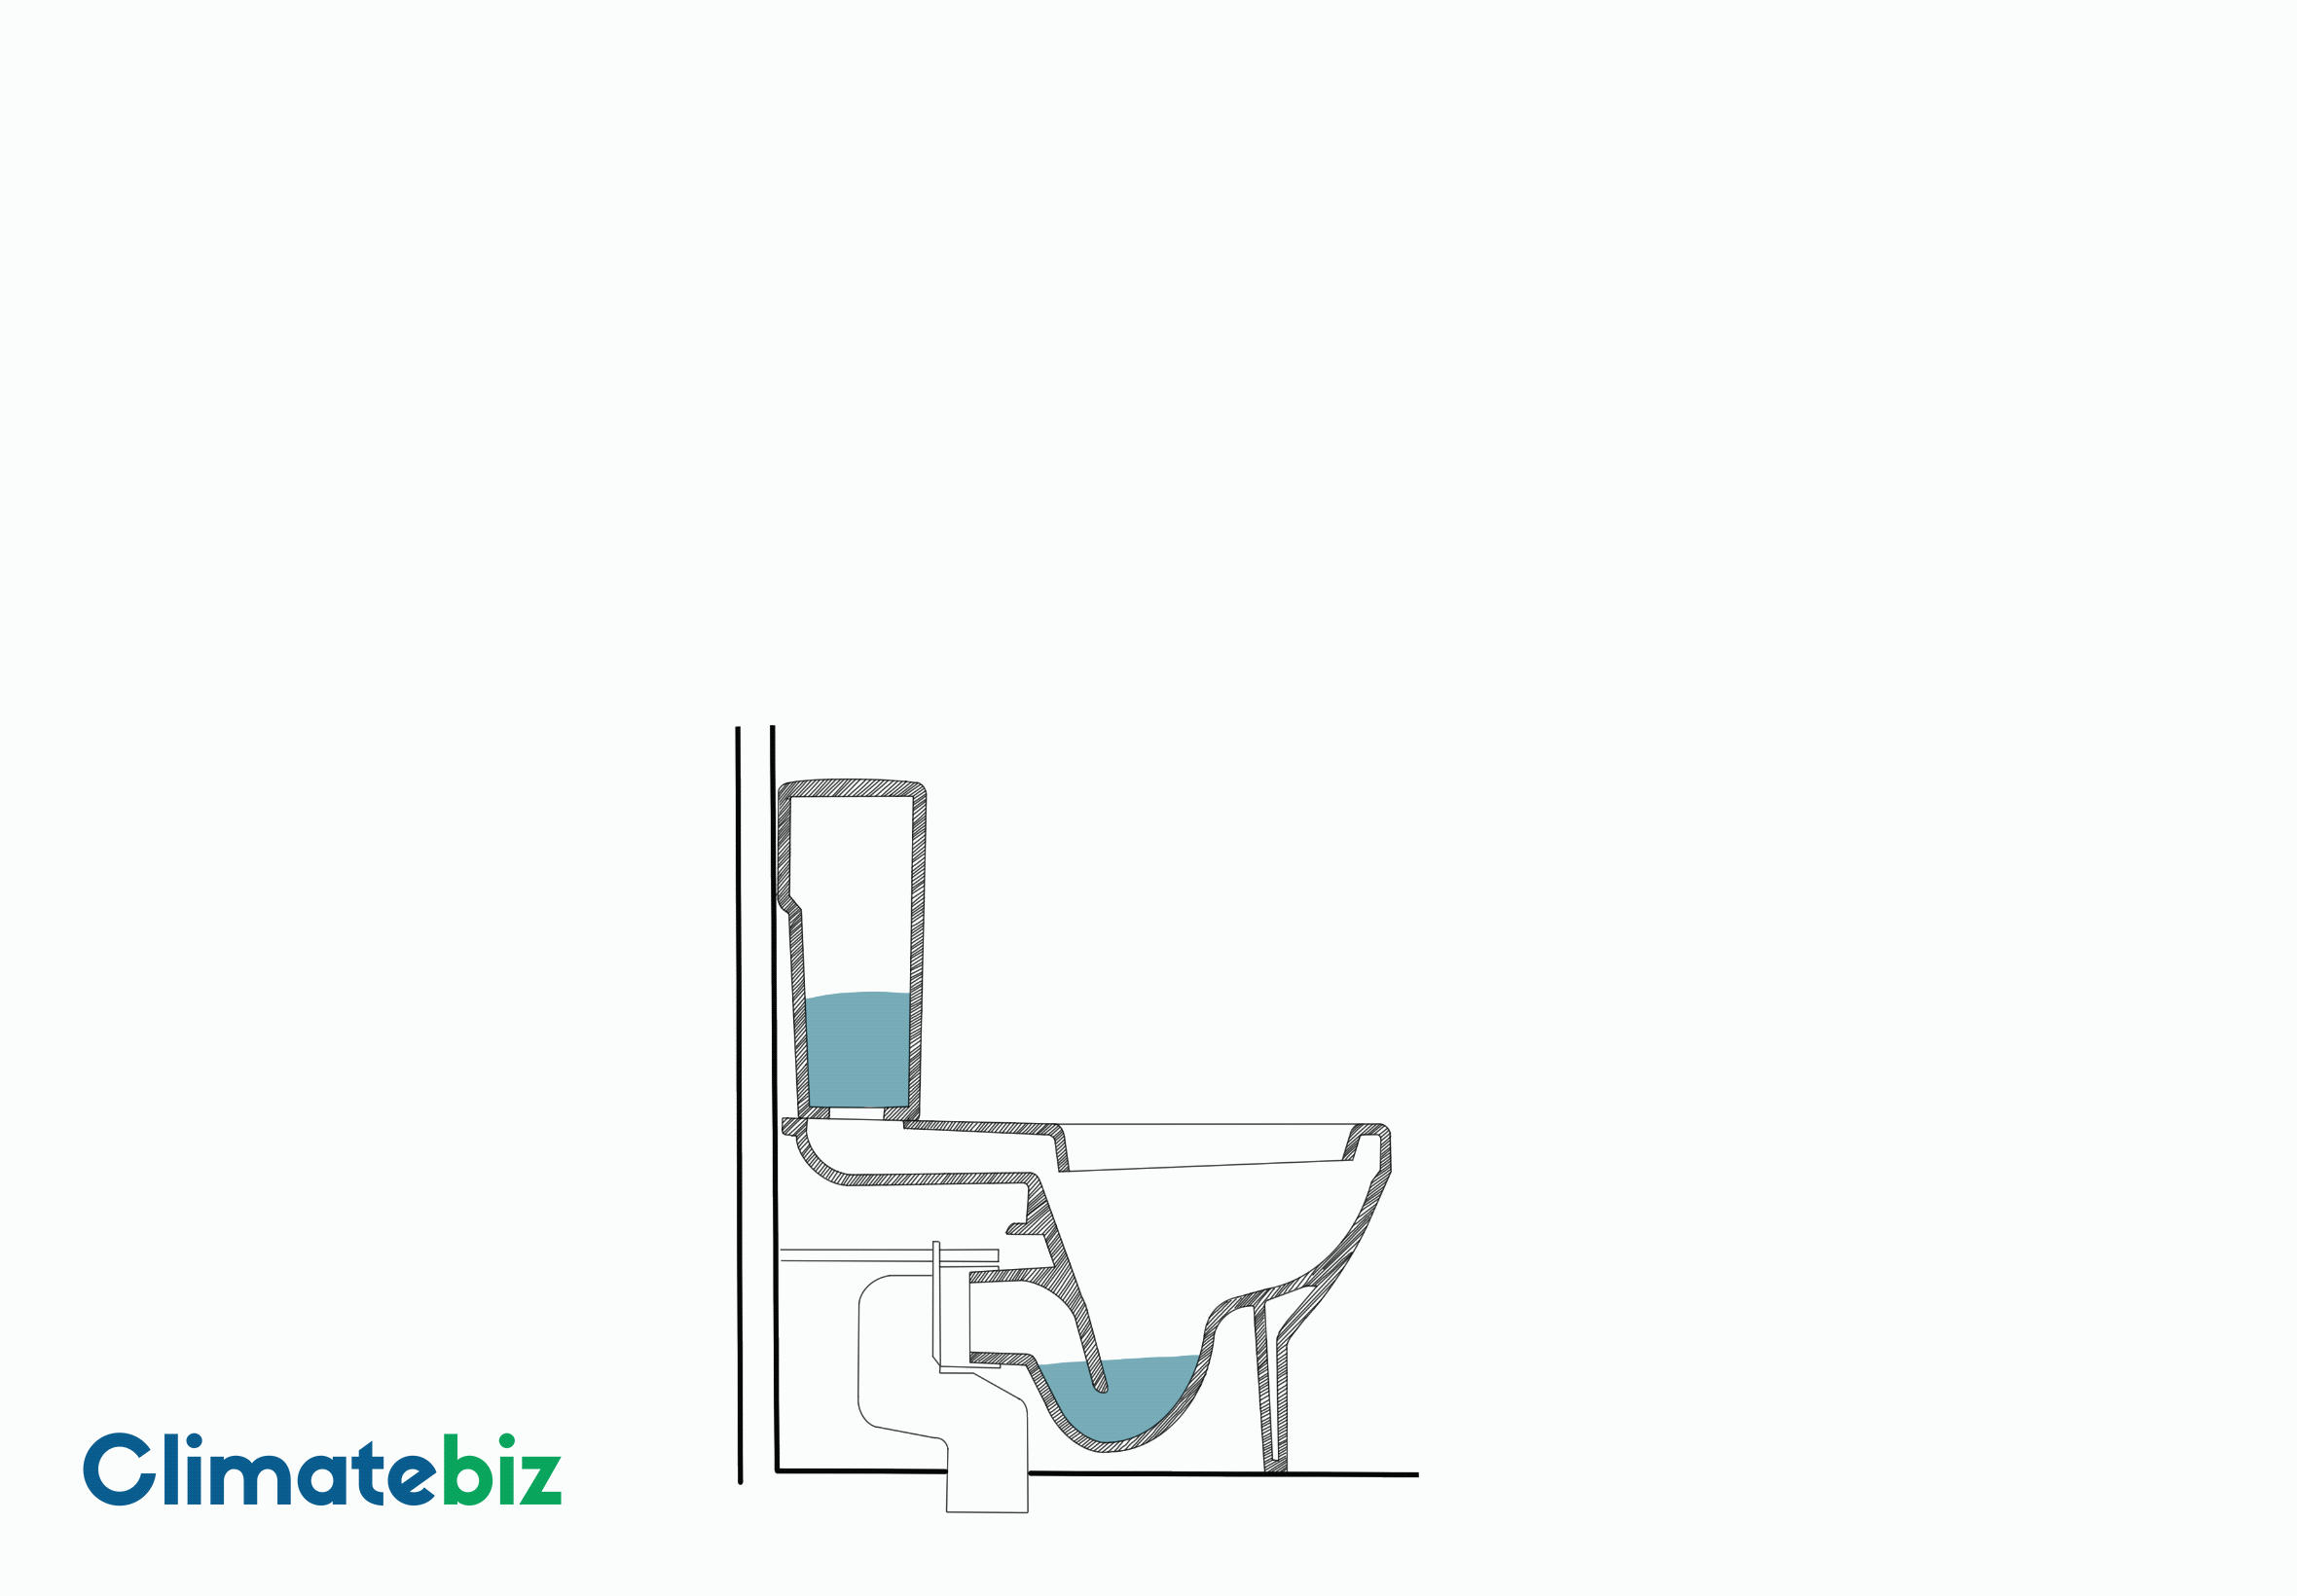 The amount of water (in bottles) a low-flow toilet uses per flush. (9) - low-flow toilets
